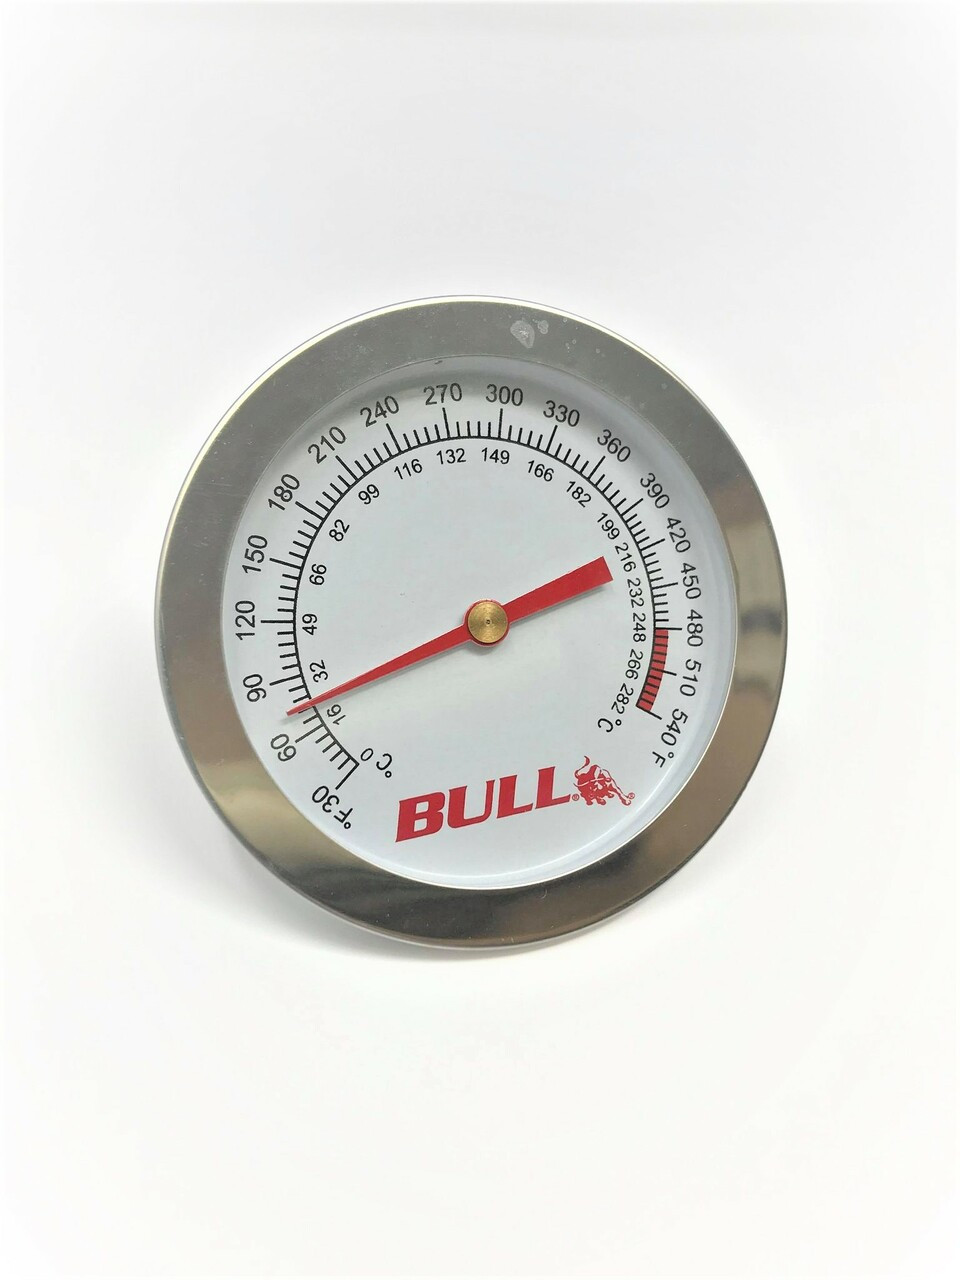 Expert Grill Grill Replacement Temperature Gauges & Thermometers